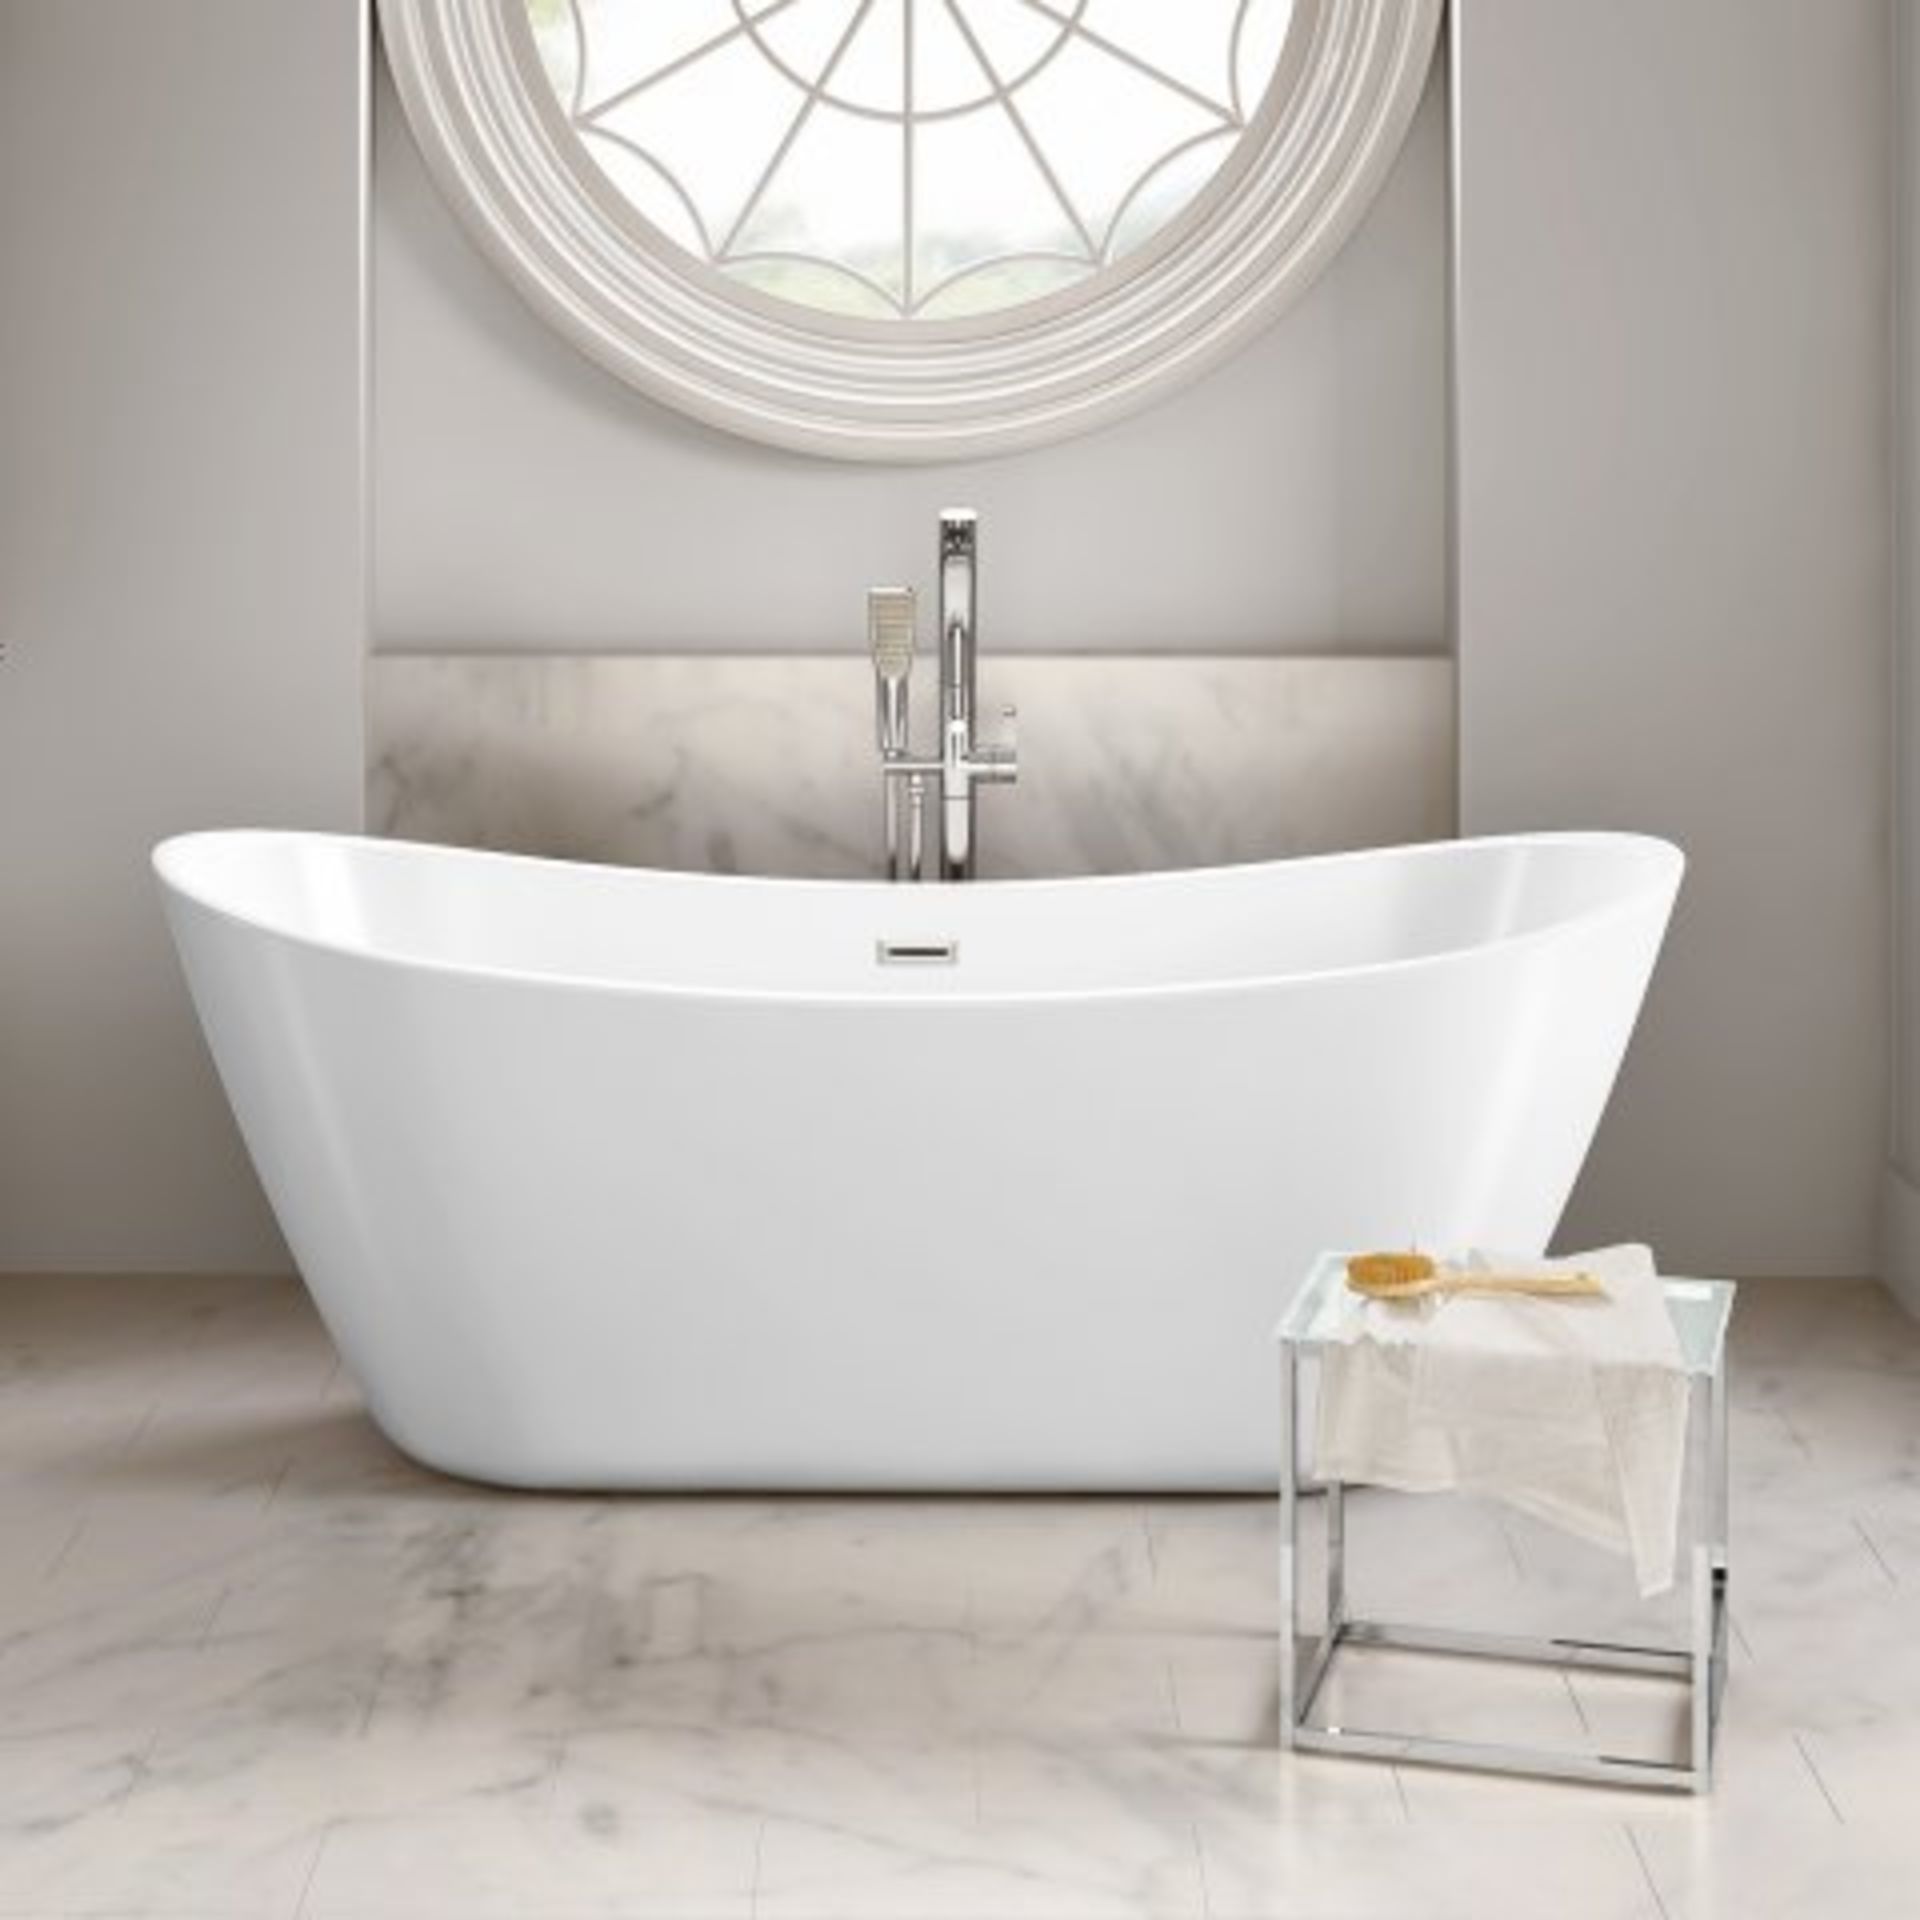 (O34) 1830mmx710mm Caitlyn Freestanding Bath - Large. RRP £1,499. Showcasing contemporary clean